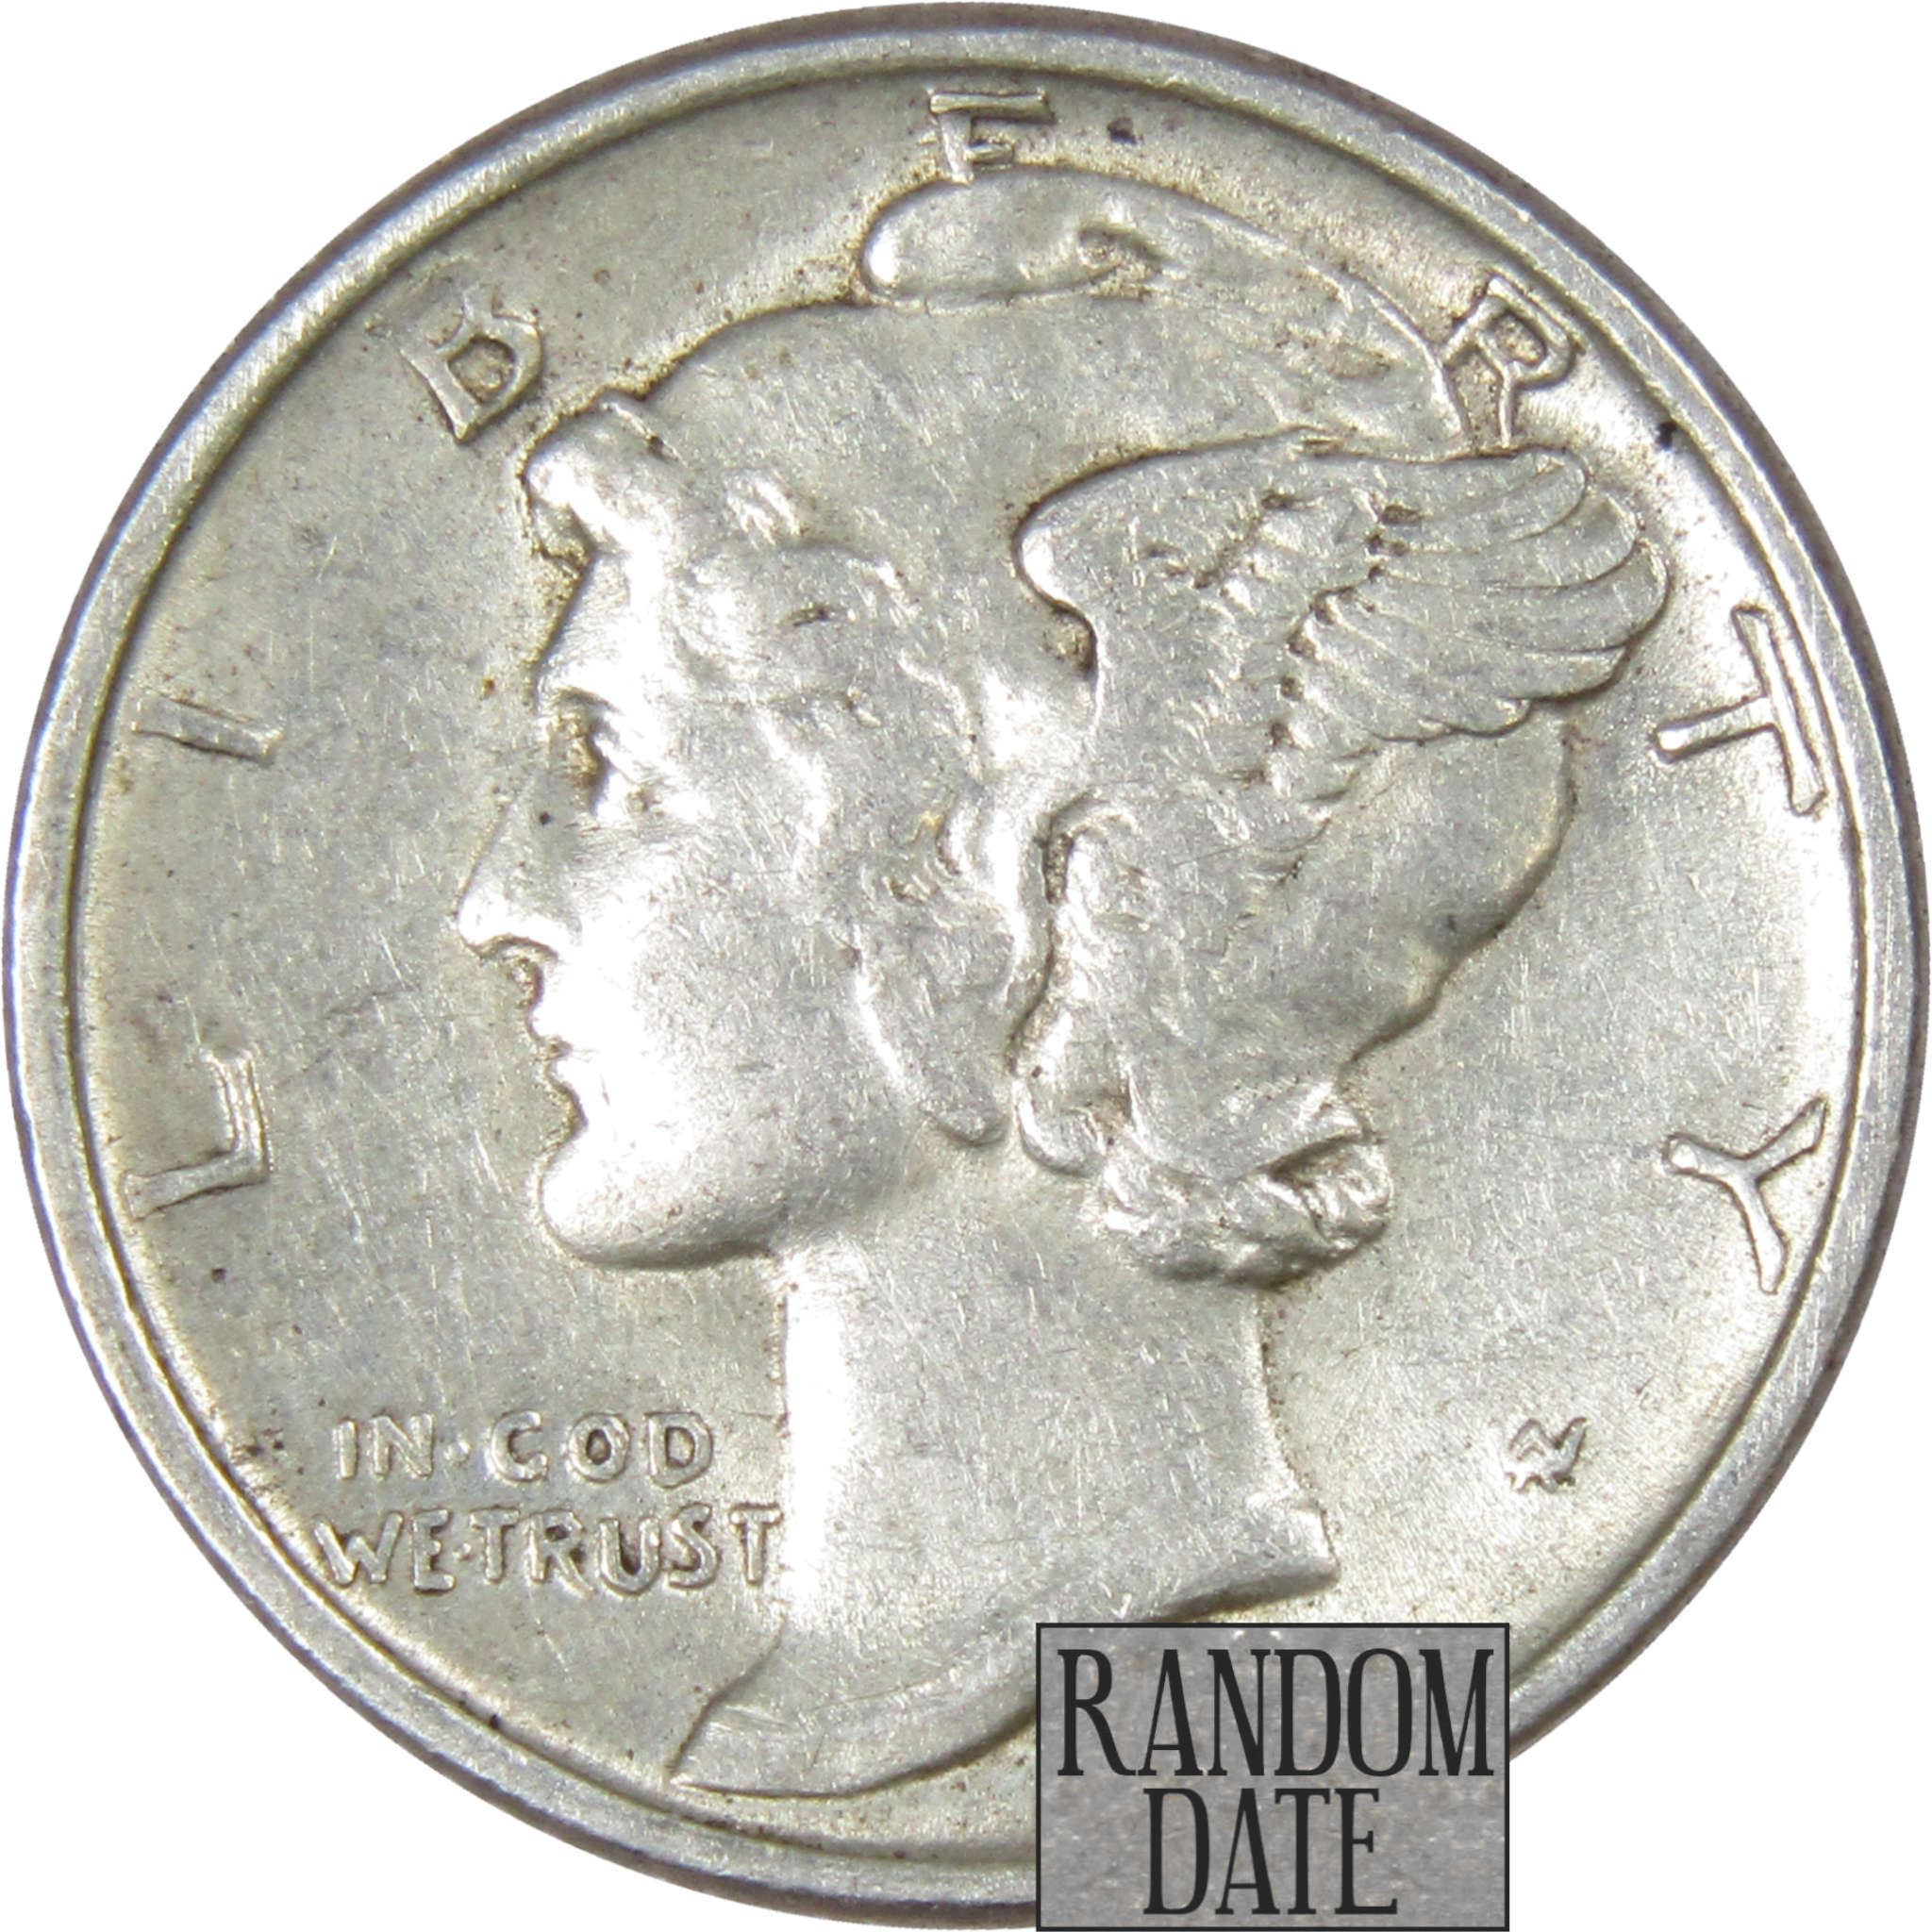 Mercury Dime Random Date XF EF Extremely Fine 90% Silver 10c US Coin Collectible